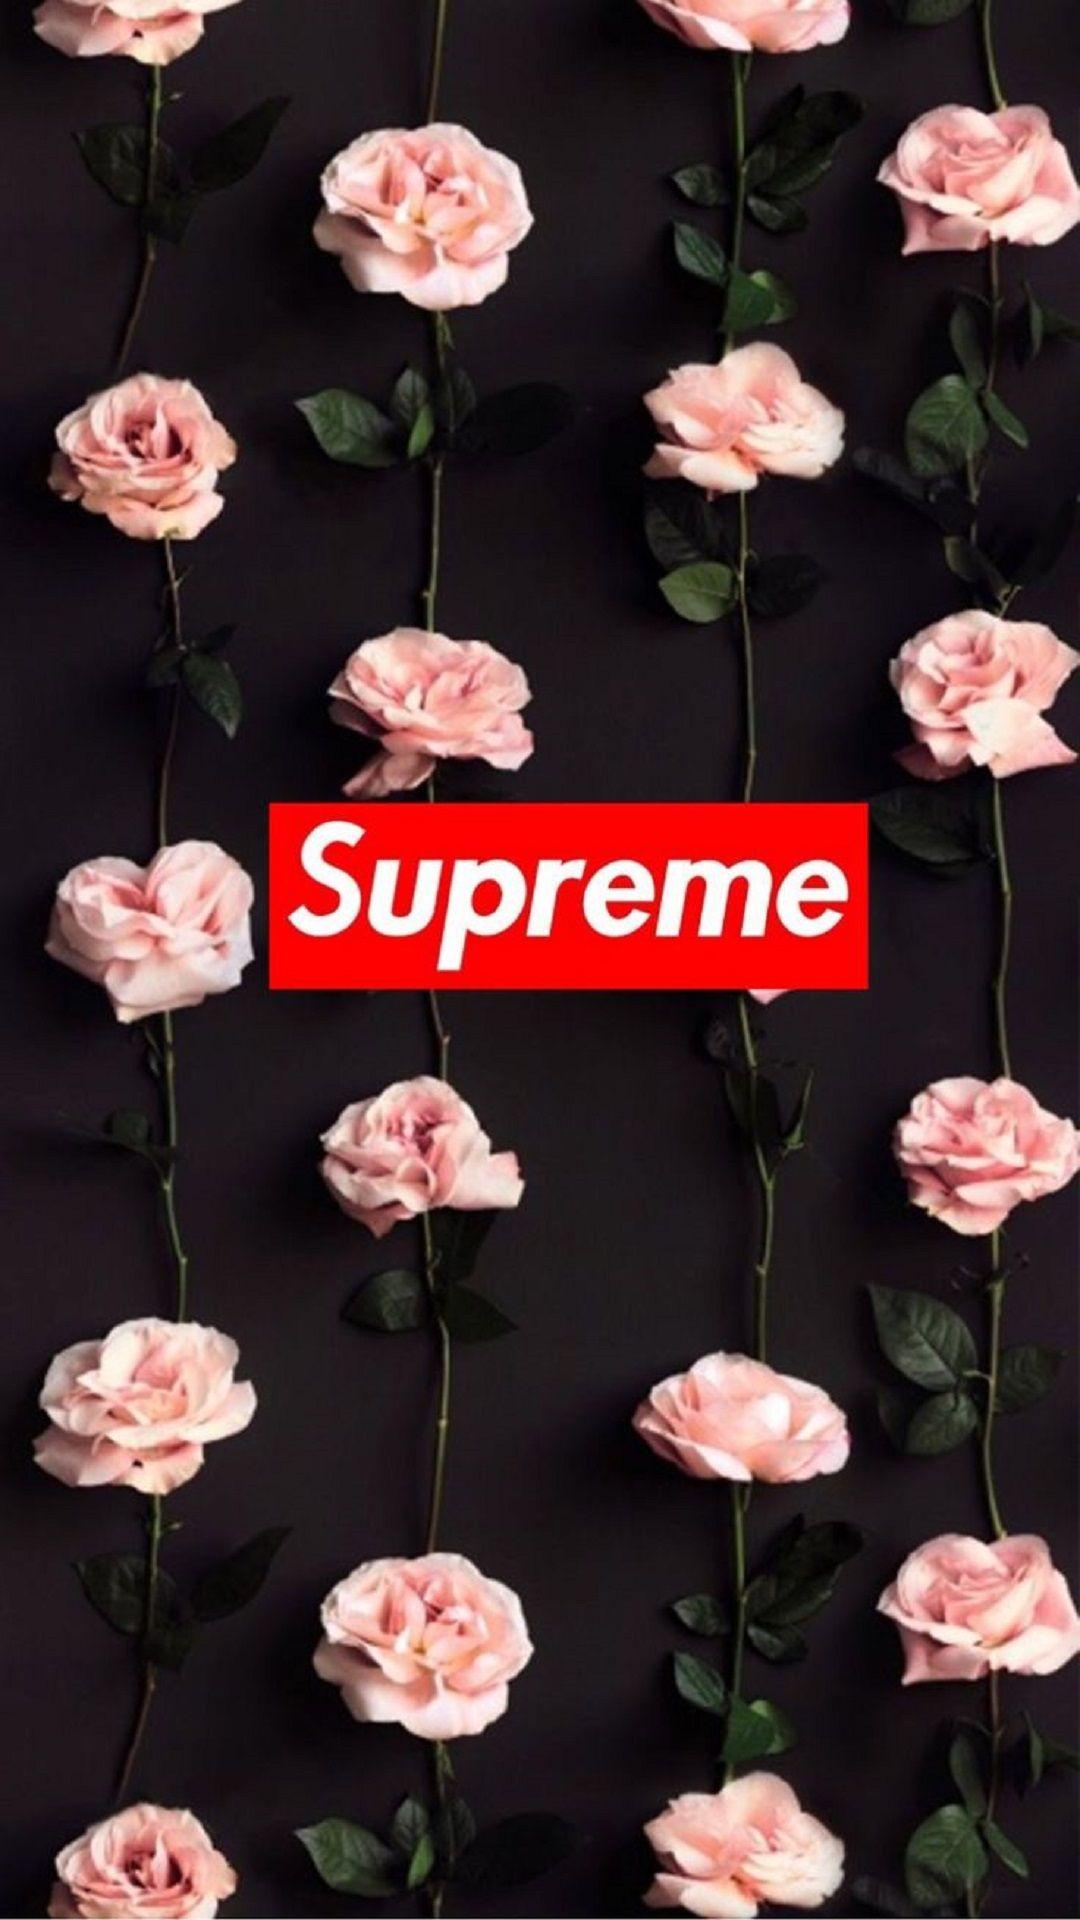 Supreme Roses Apple iPhone 7 Plus HD wallpaper available